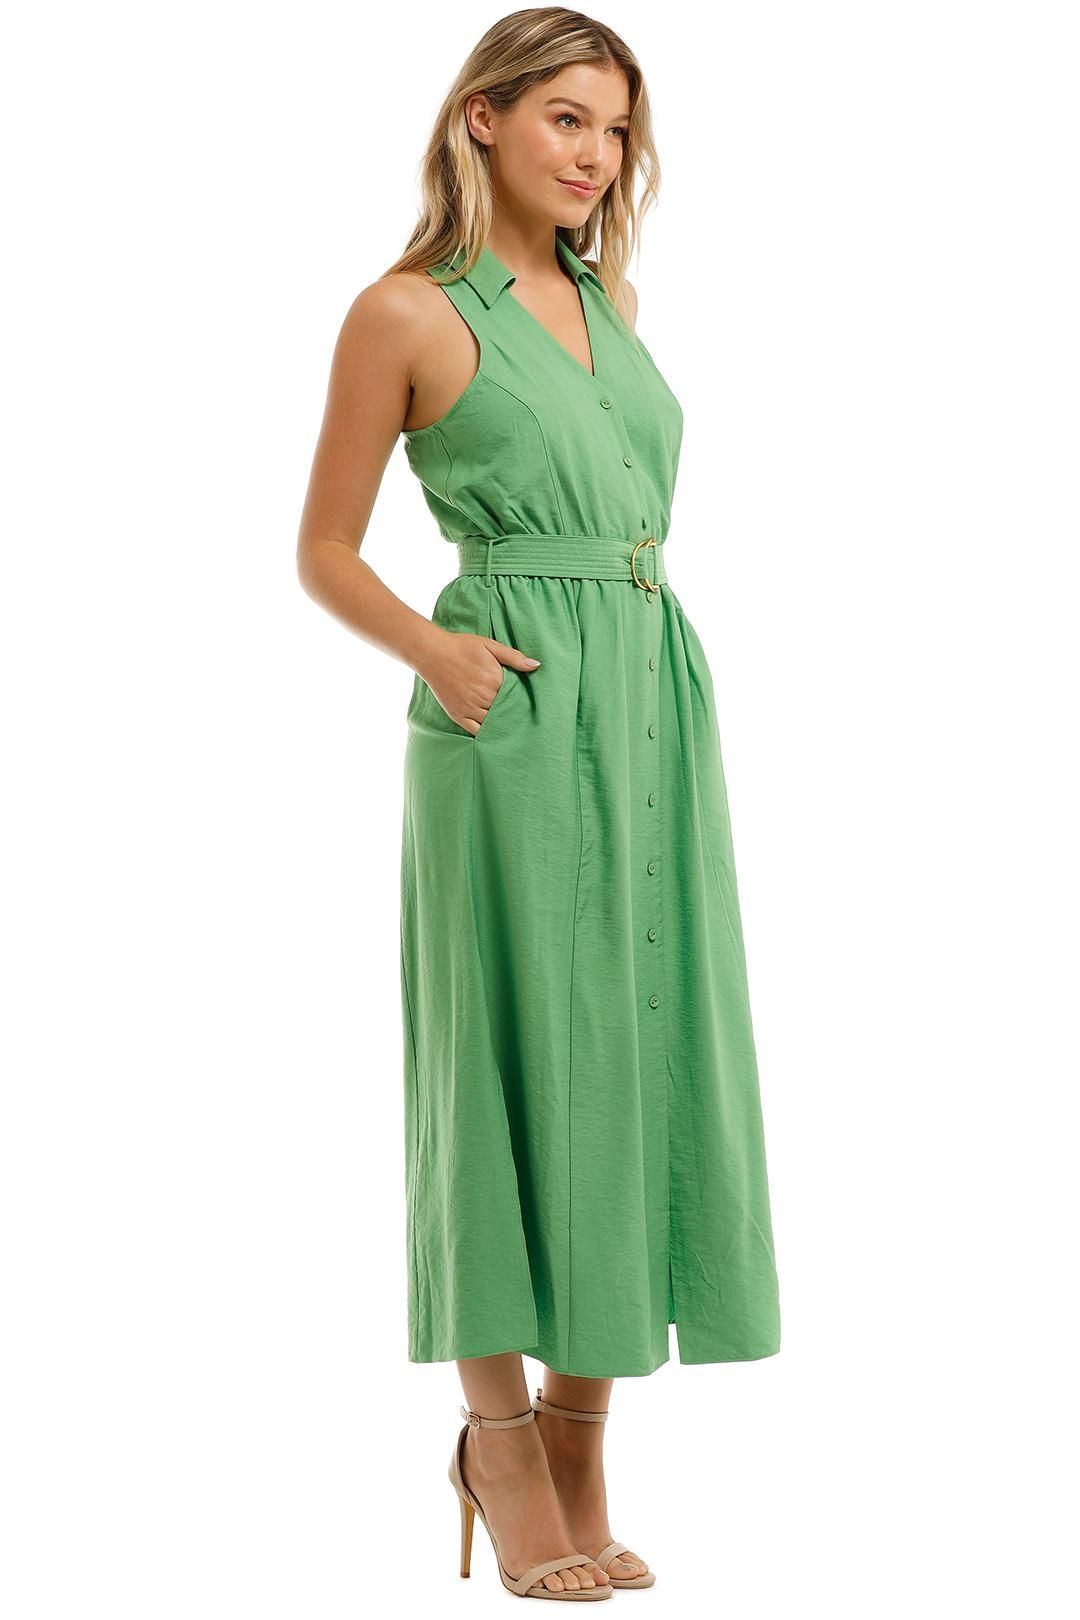 Halter Shirt Dress in Spring Green by Witchery for Hire | GlamCorner